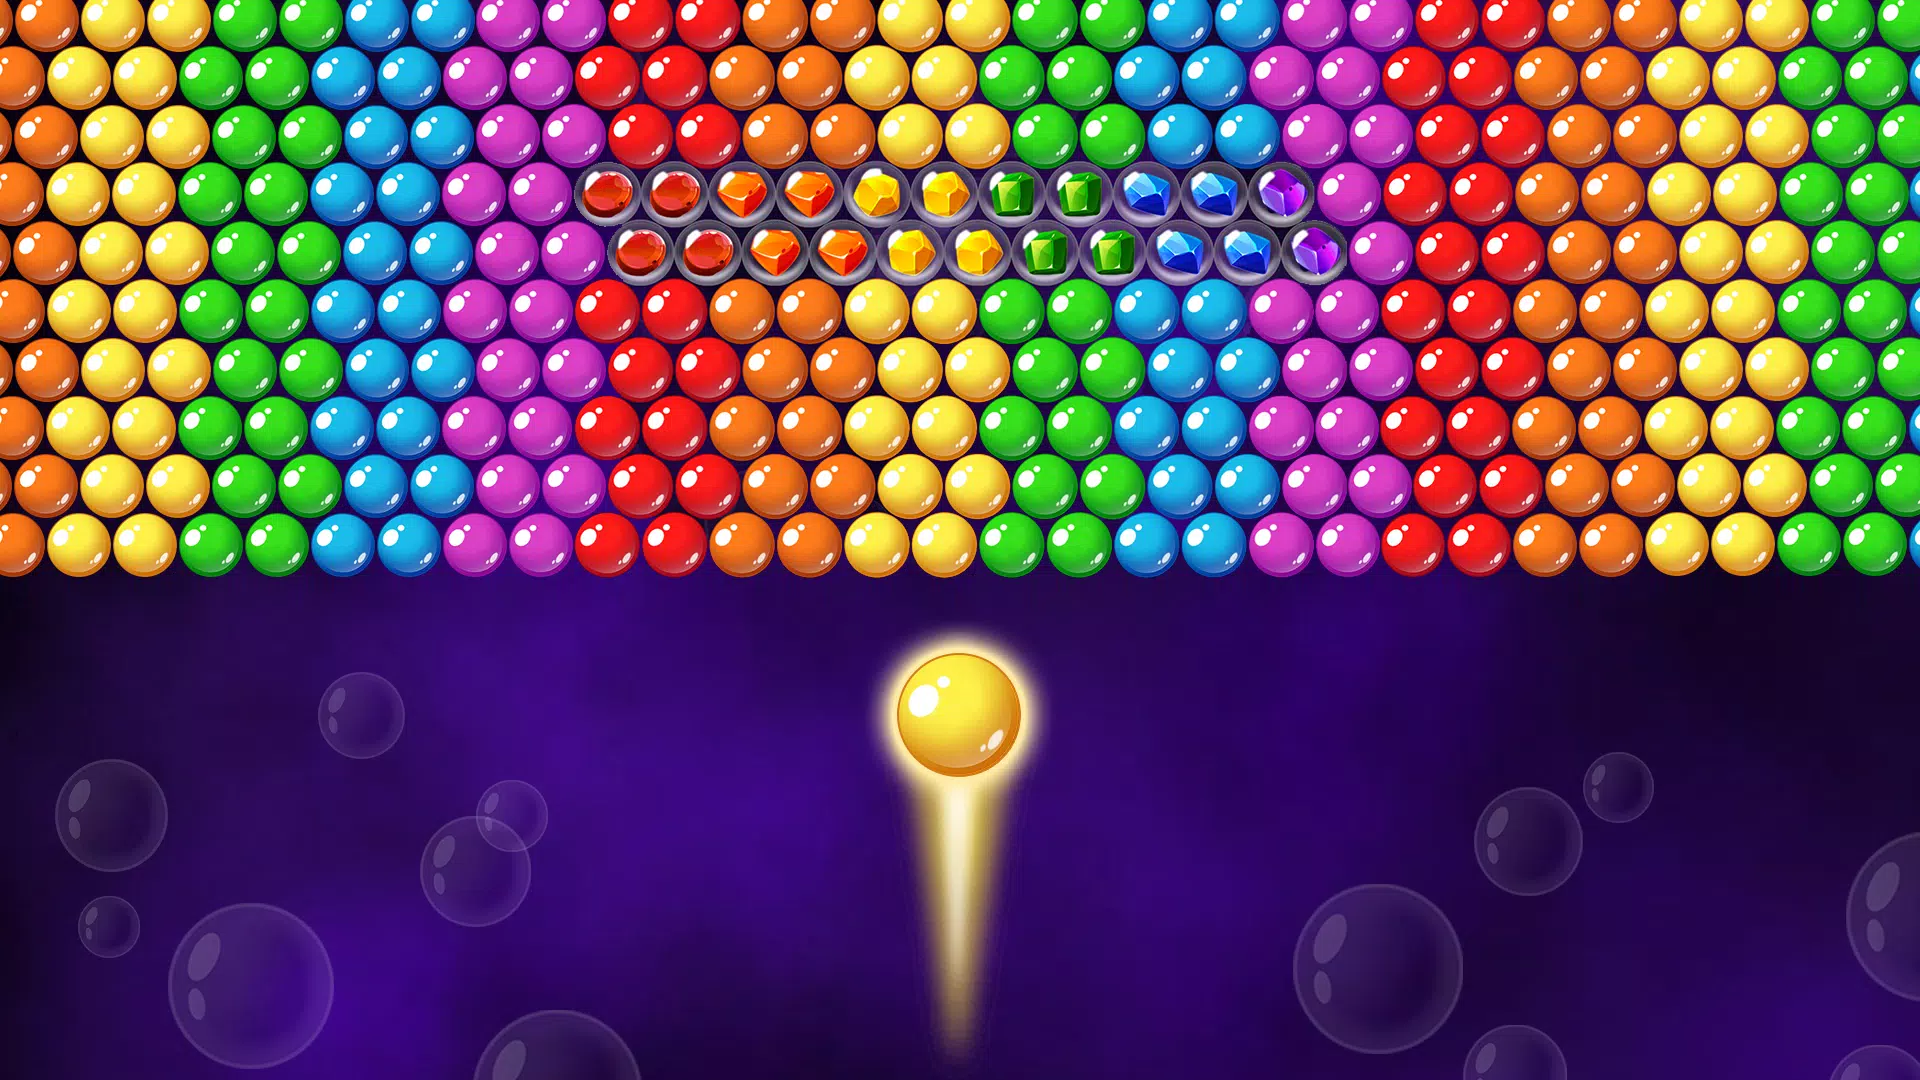 Free Bubble Deluxe Shoot 15 APK Download For Android